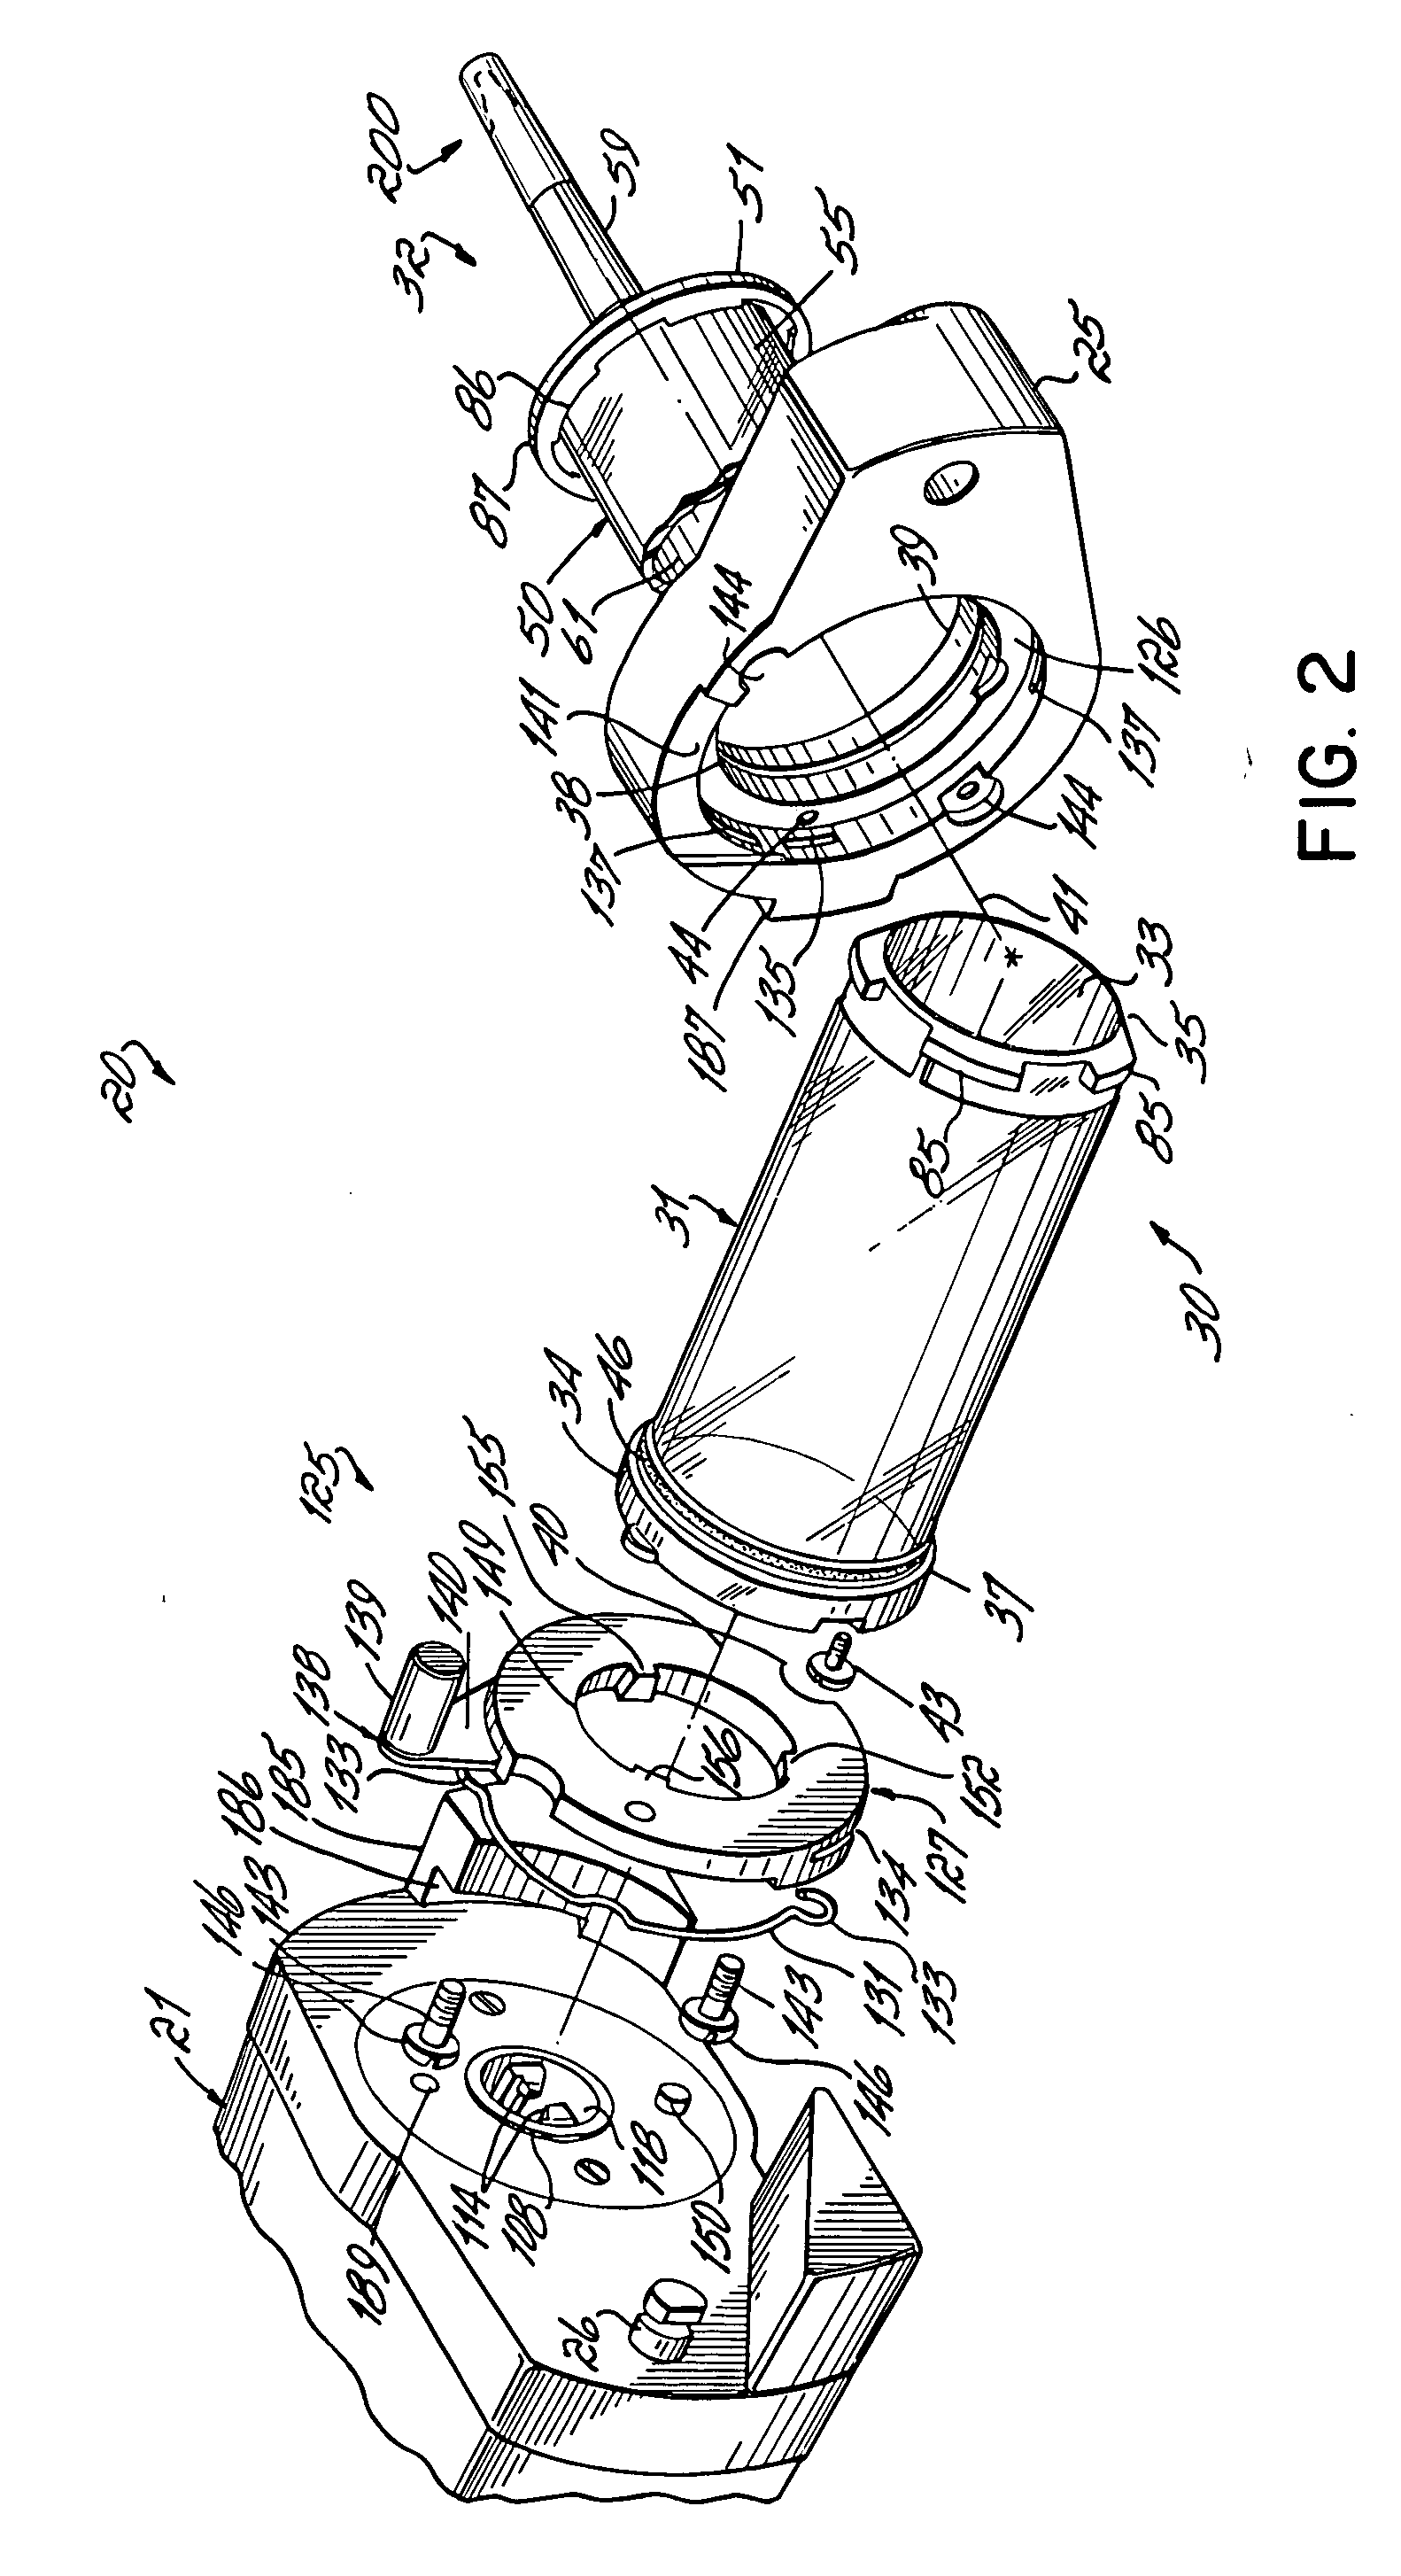 Disposable front loadable syringe and injector